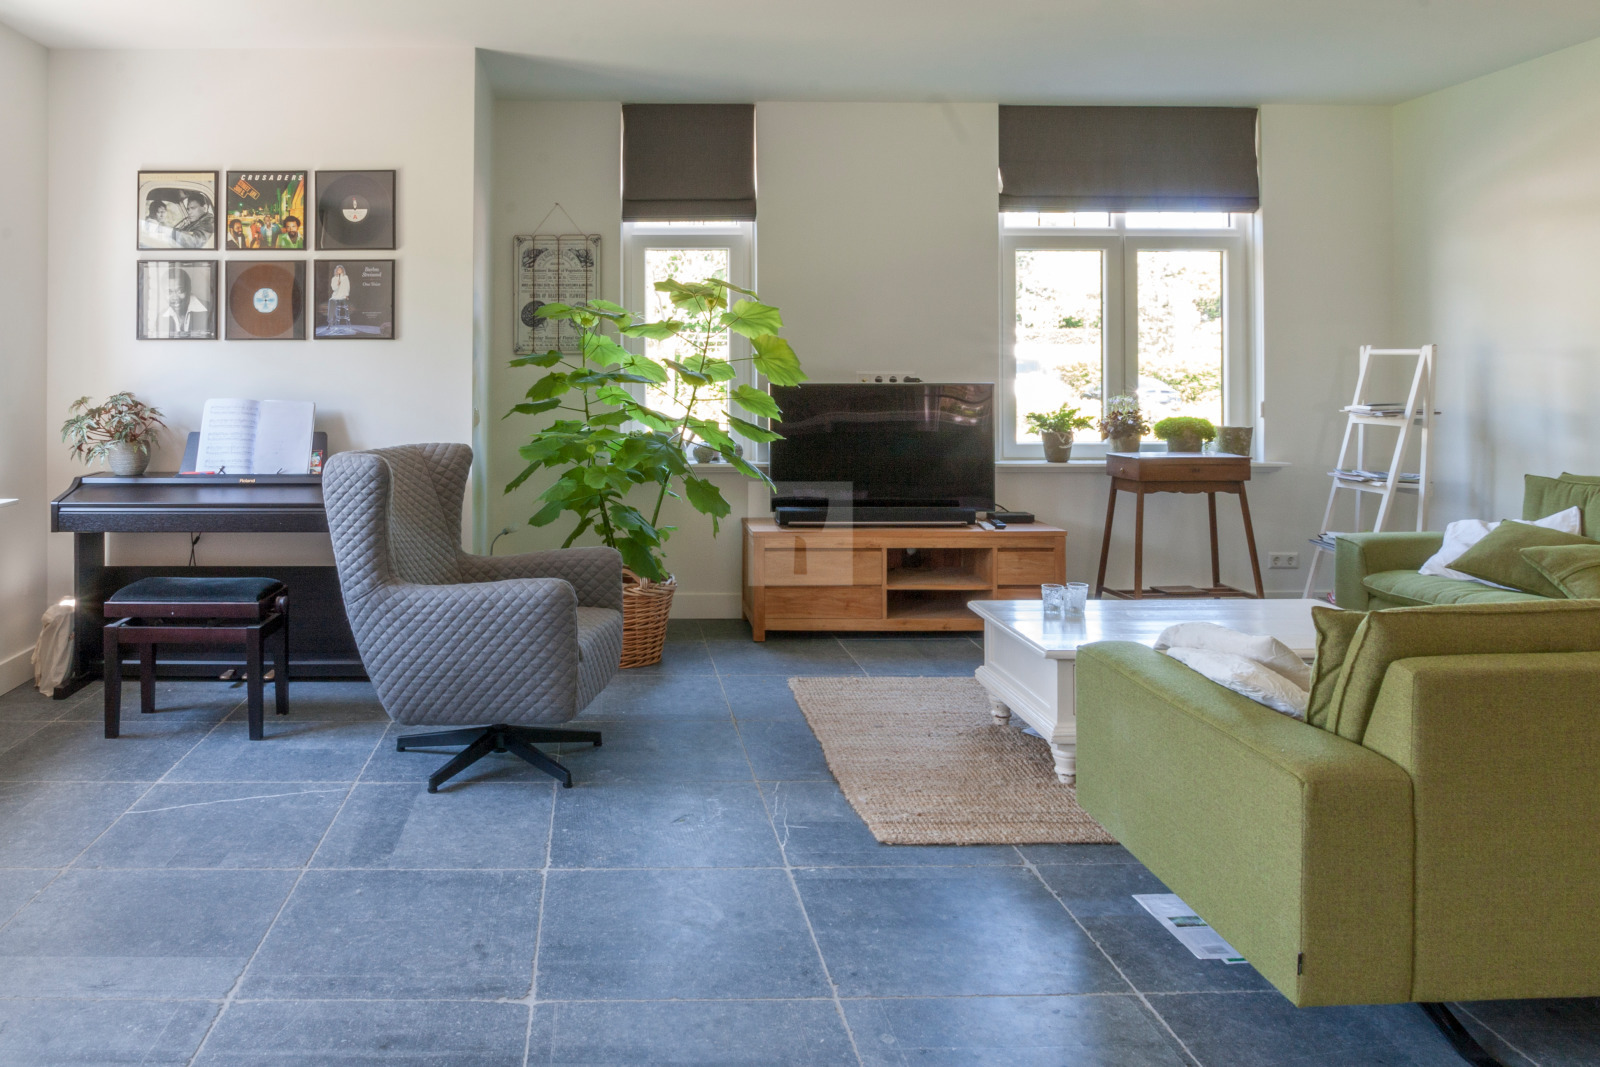 Choosing tiles: what you need to look out for